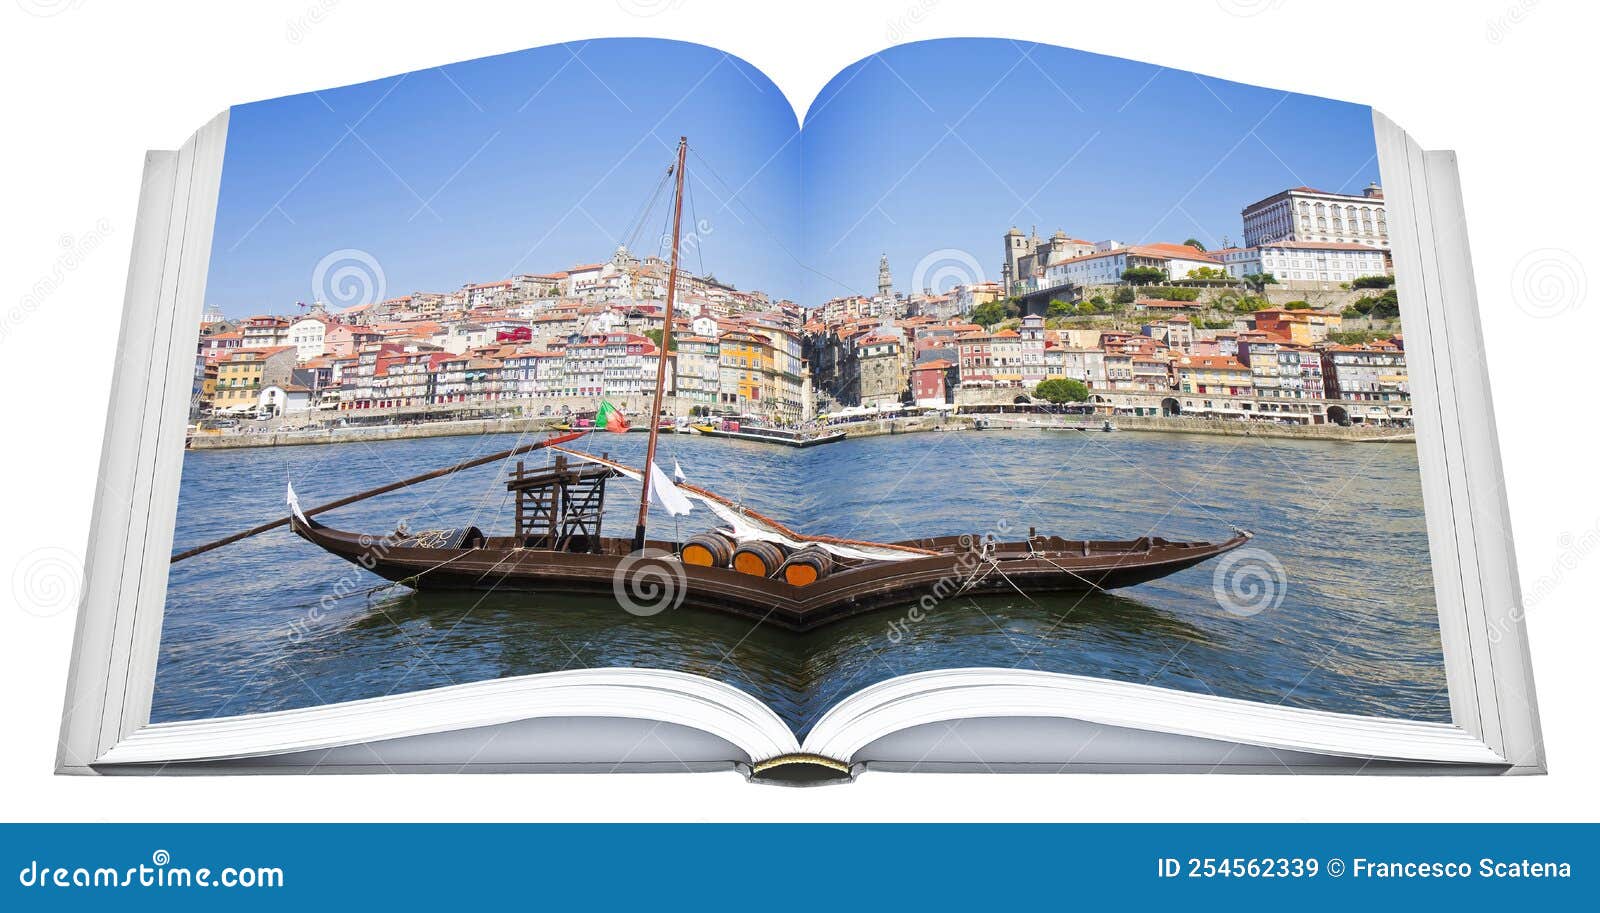 typical portuguese wooden boats, called barcos rabelos - real opened book concept  on white portugal